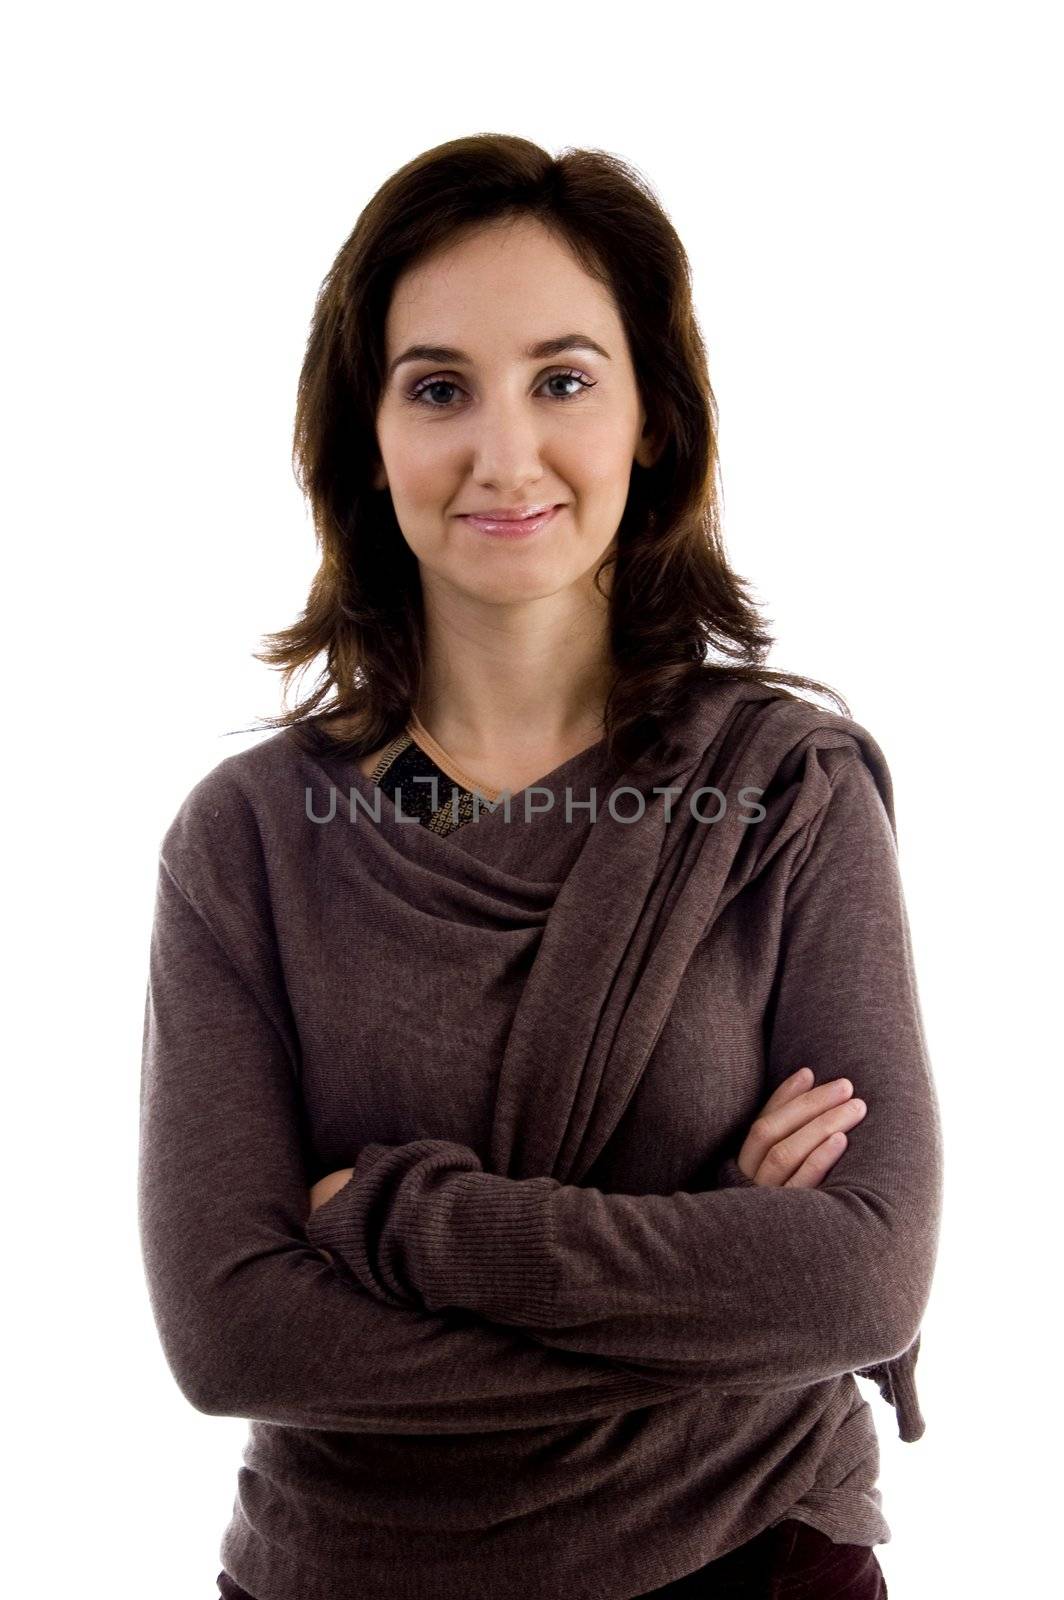 smart young teenager posing on an isolated white background